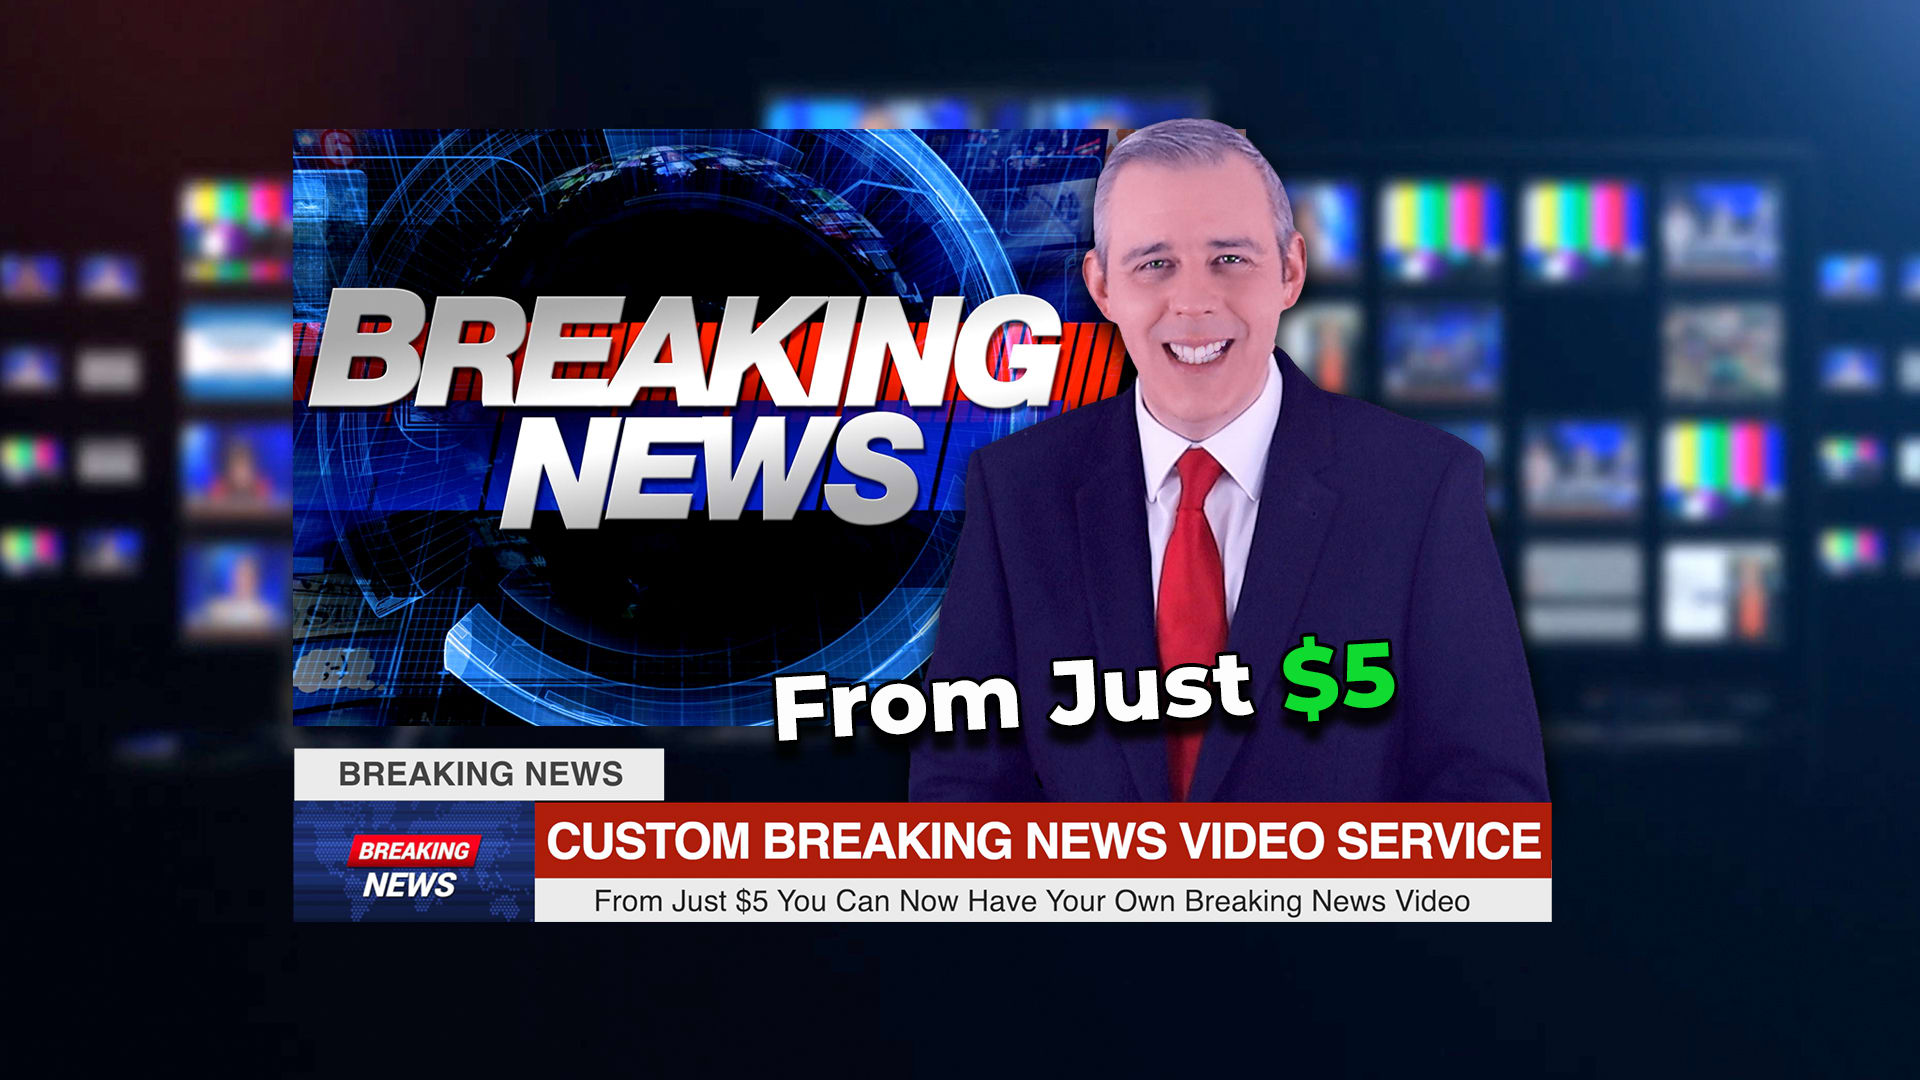 Be your spokesperson in a breaking news video promotion by Paultoole |  Fiverr